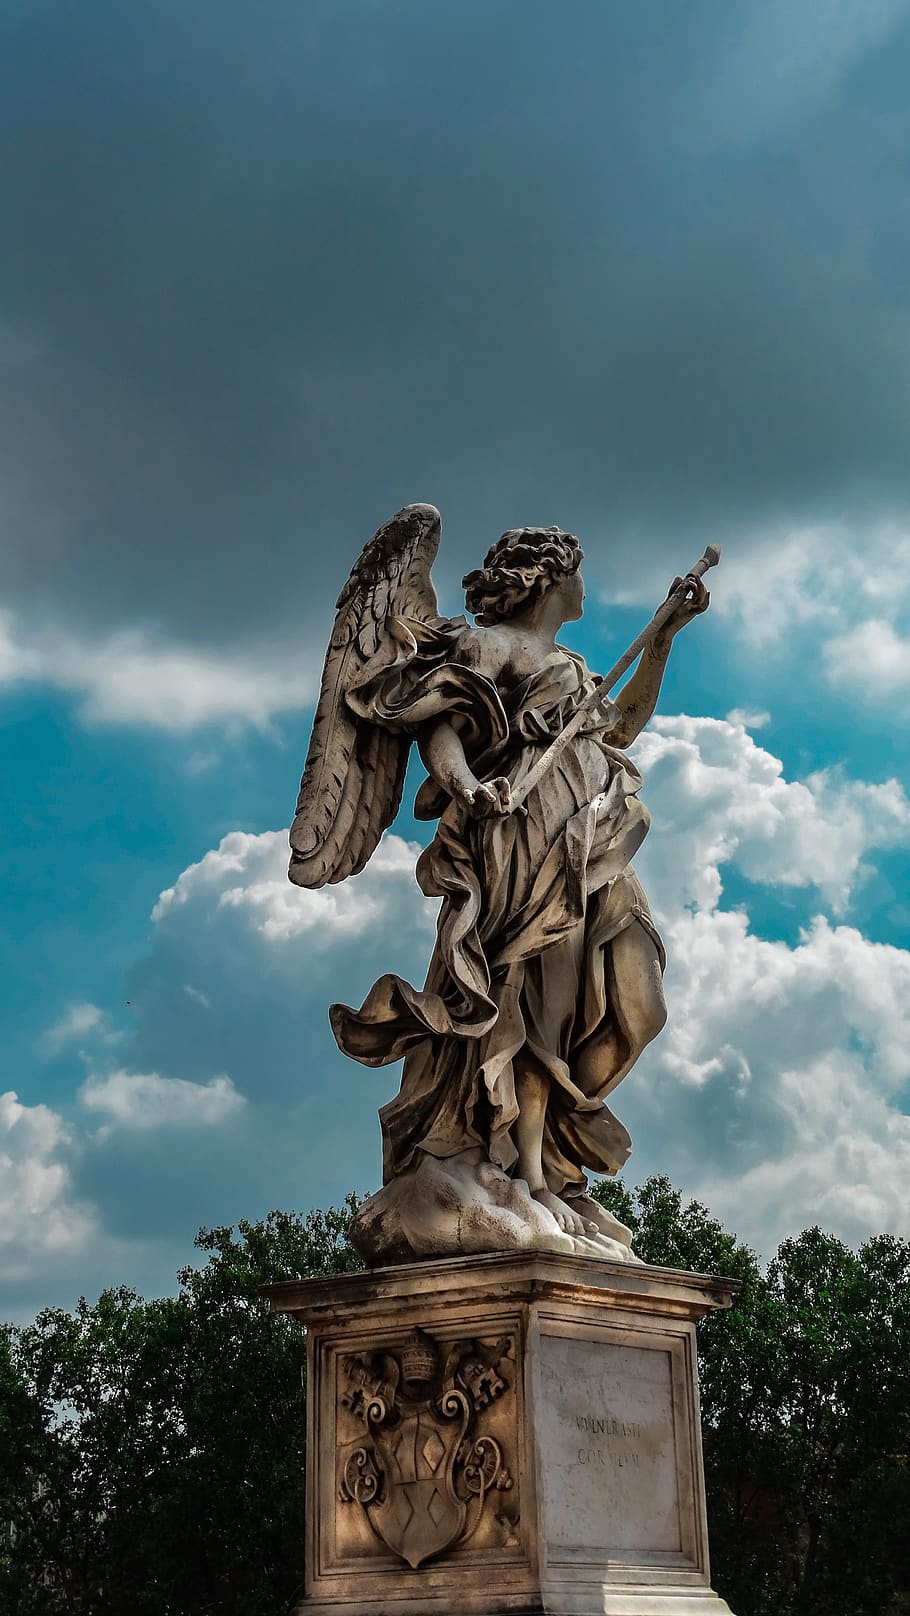 rome, bridge, italy, monument, architecture, angel, sculpture, the statue of, historically, tourism